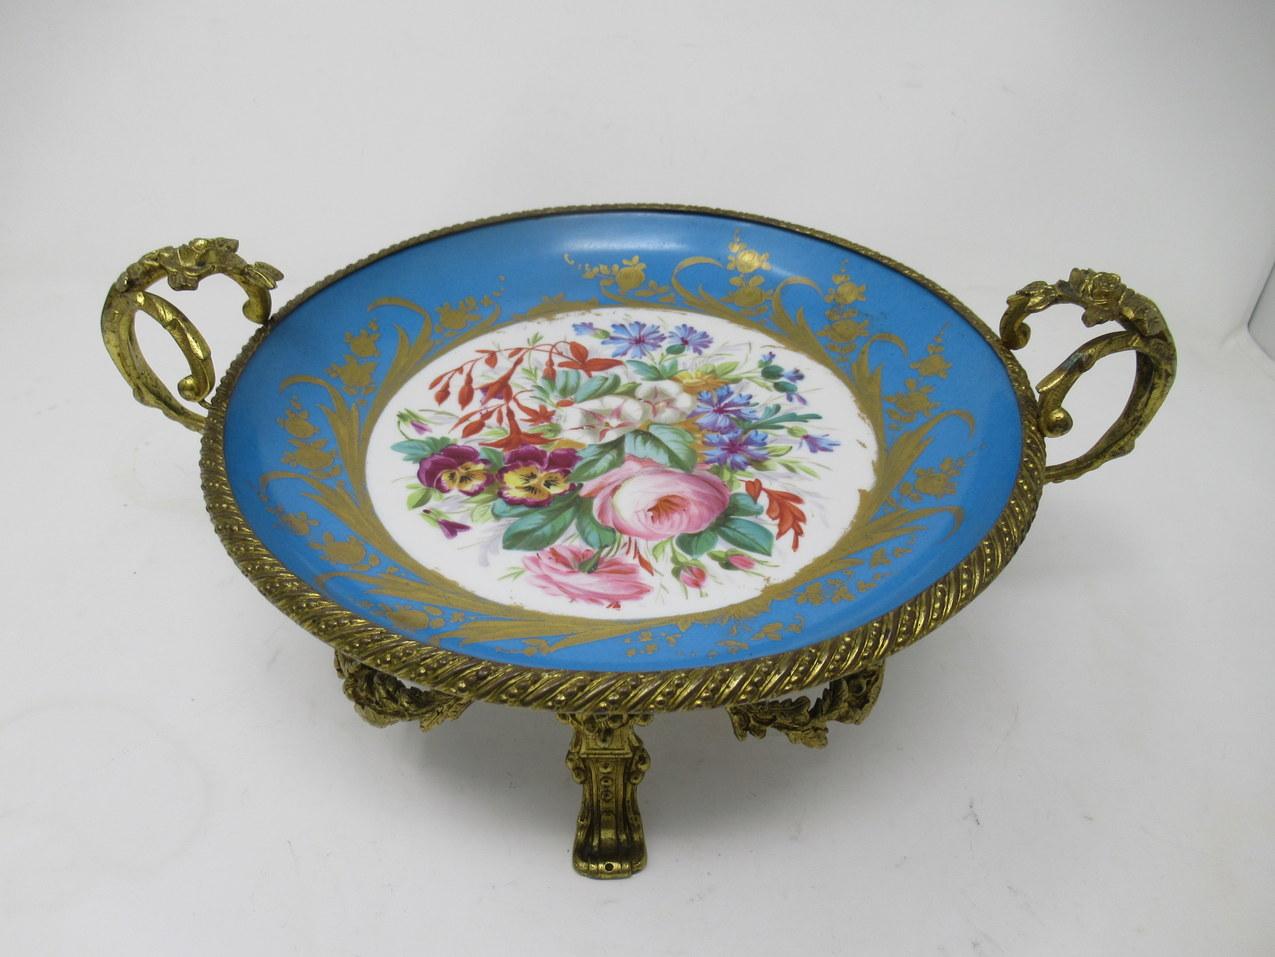 19th Century Antique French Sevres Ormolu Gilt Bronze Dore Porcelain Tazza Cabinet Plate Dish For Sale